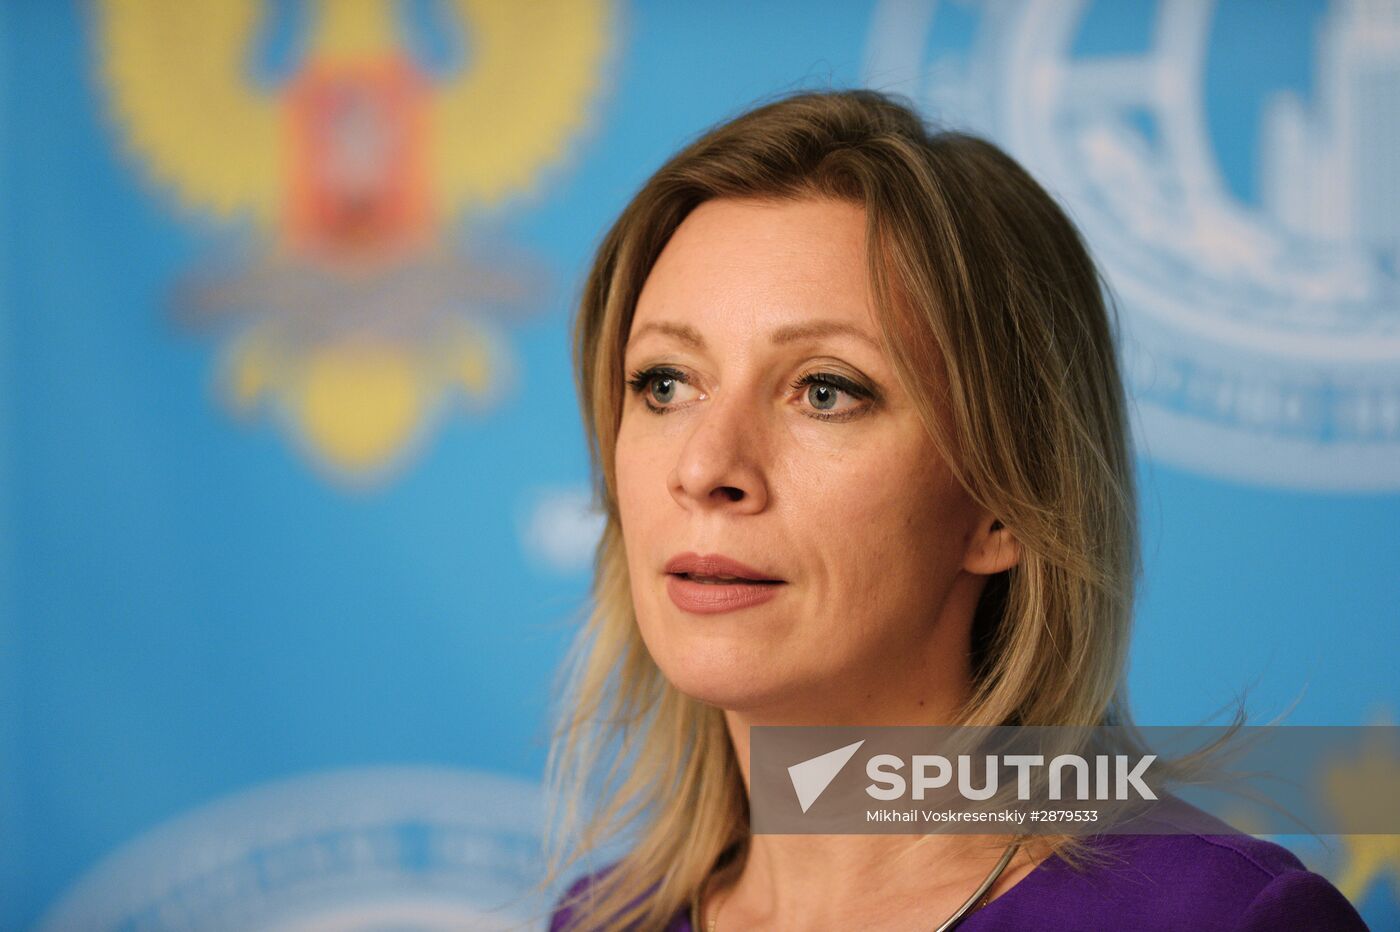 Briefing by maria Zakharova on current political affairs